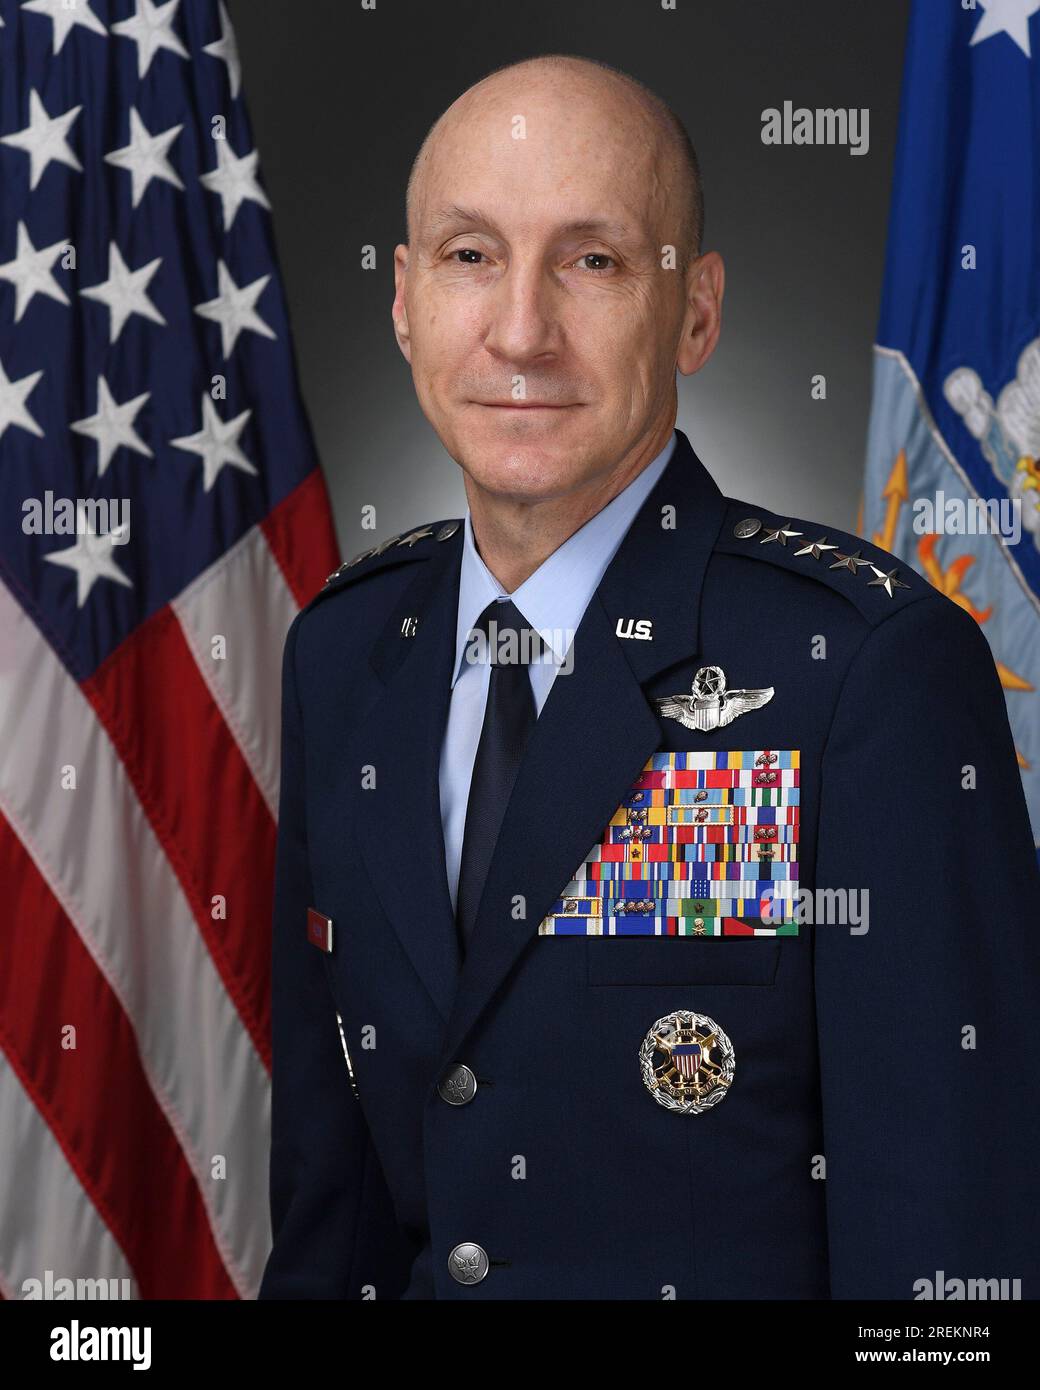 Air Force Vice Chief of Staff Gen. DAVID W. ALLVIN, a command pilot with expertise in joint planning and strategy, has been nominated as the Air Force's 23rd Chief of Staff, President Joe Biden and Defense Secretary Lloyd Austin III announced July 26. Allvin would assume the highest military position in the Air Force, responsible for the organization, training and equipping of 689,000 active-duty, Guard, Reserve, and civilian members serving in the United States and overseas. If confirmed by the Senate, he is poised to replace Gen. CQ Brown, Jr., who was recently nominated to be the Chairman o Stock Photo